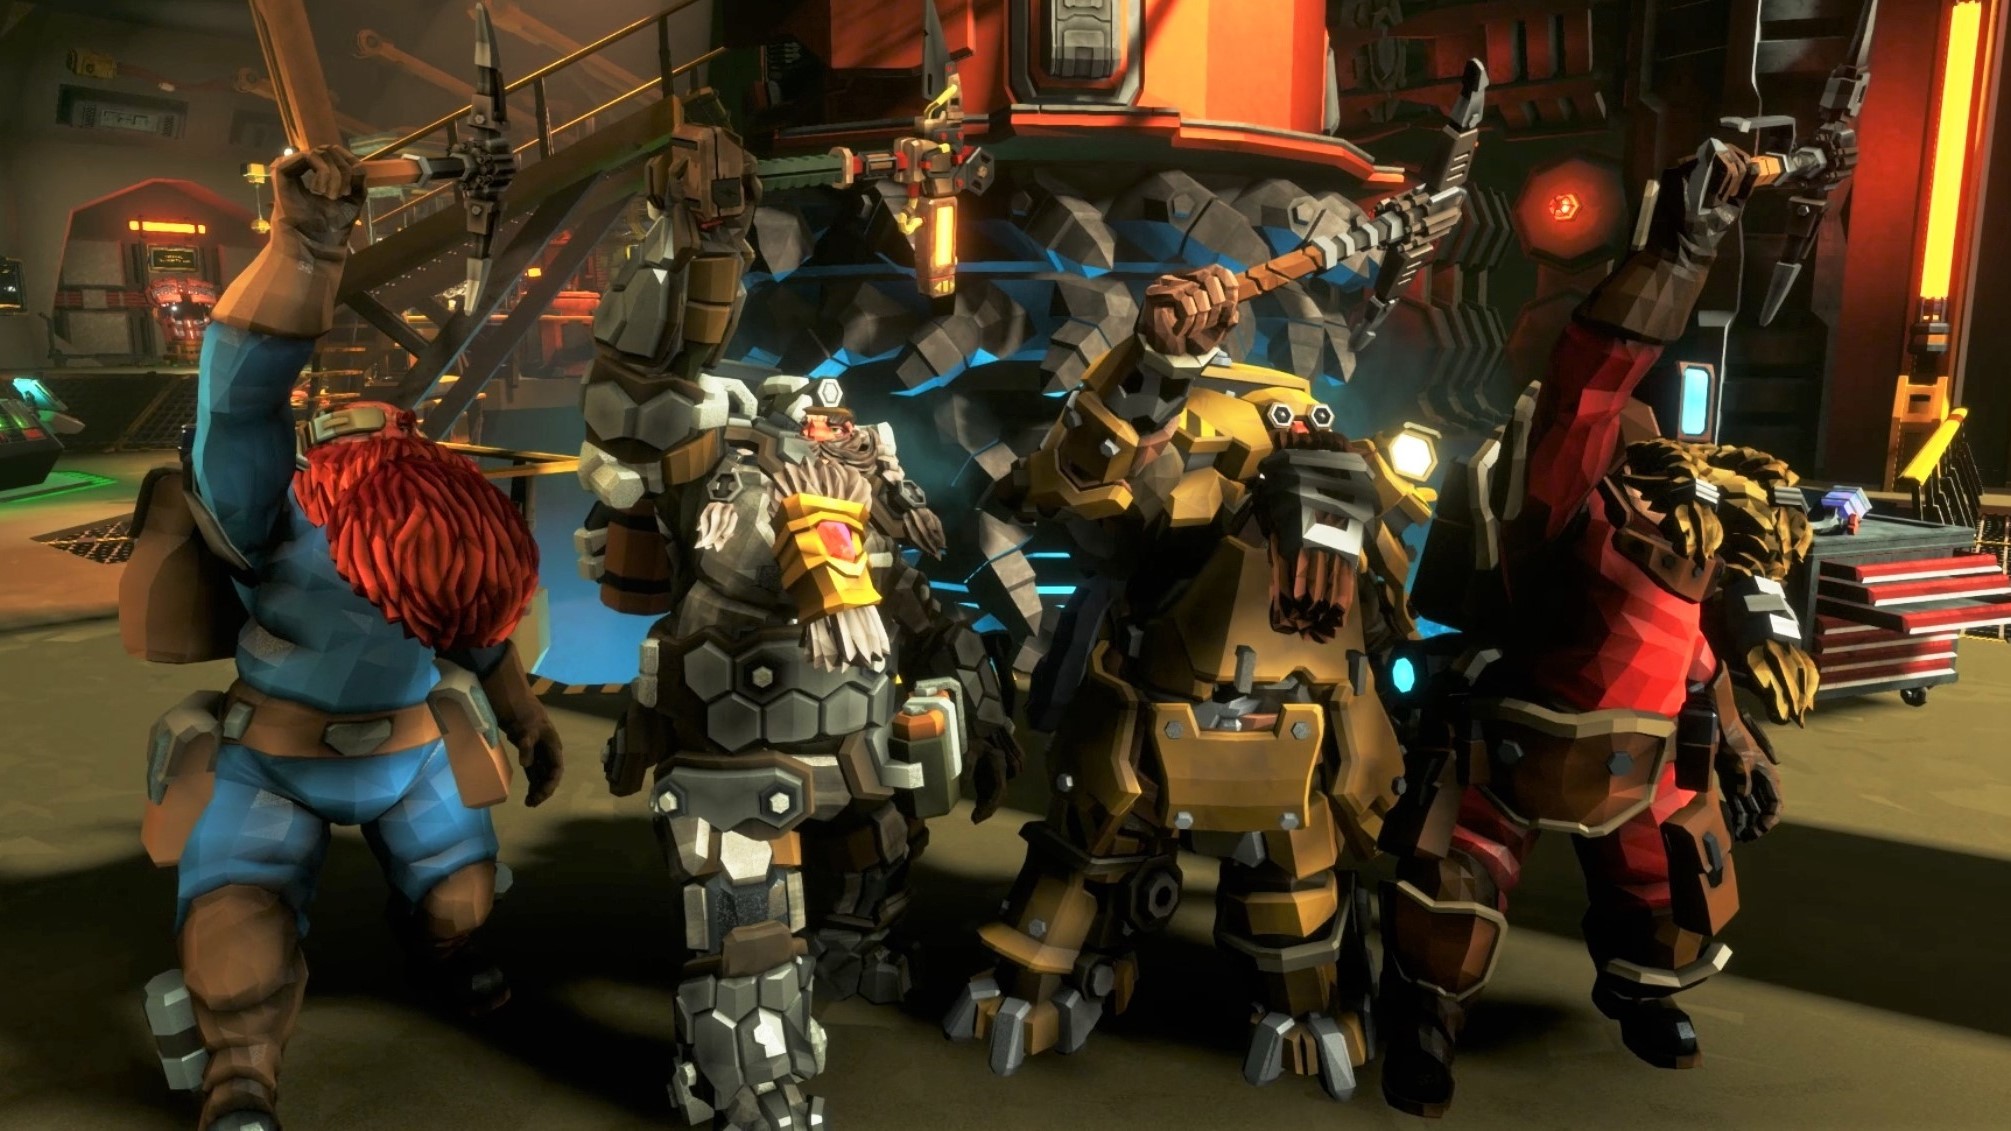 A team of dwarves doing the rock and stone salute in Deep Rock Galactic.